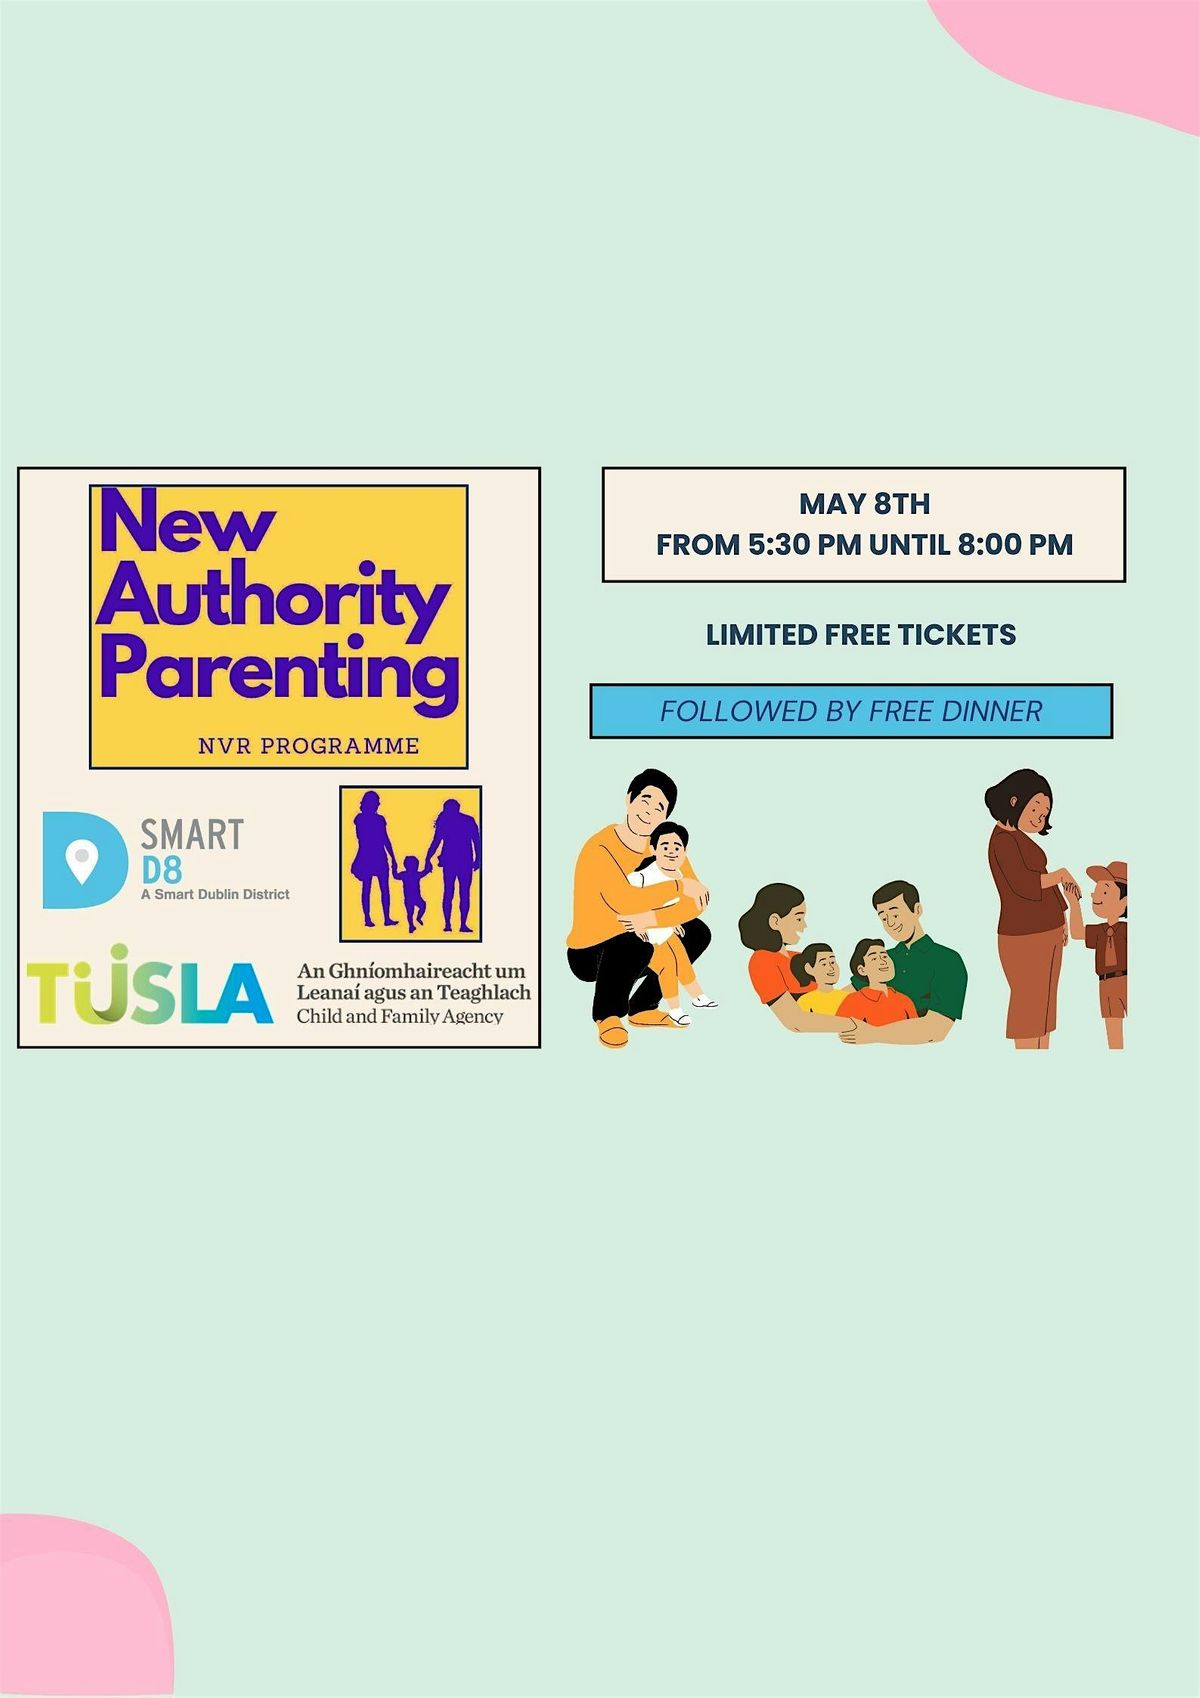 'New Authority Parenting' workshop